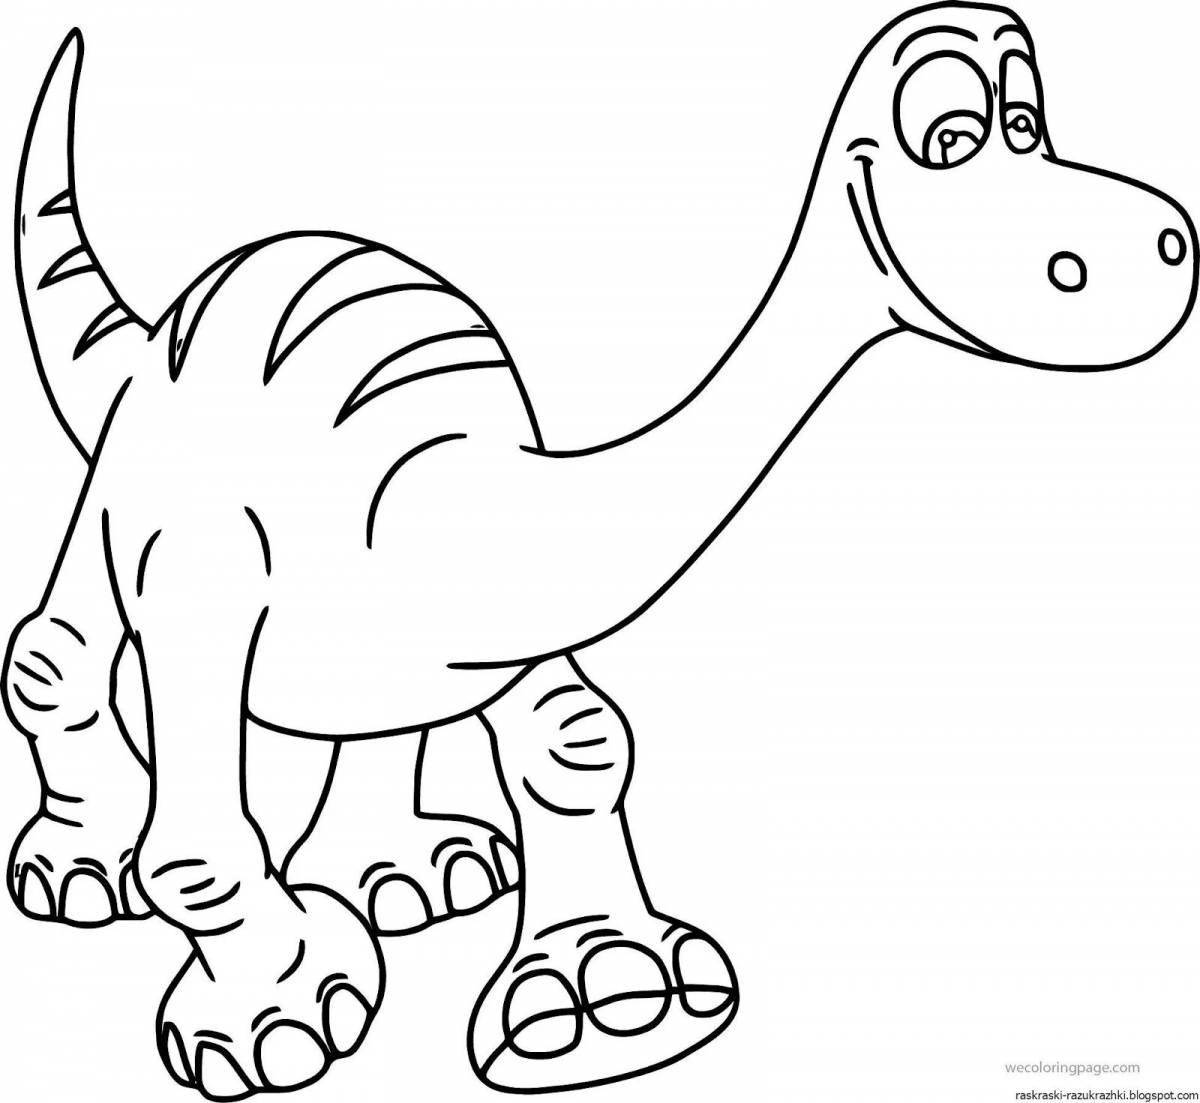 Coloring dinosaurs for children 4-5 years old